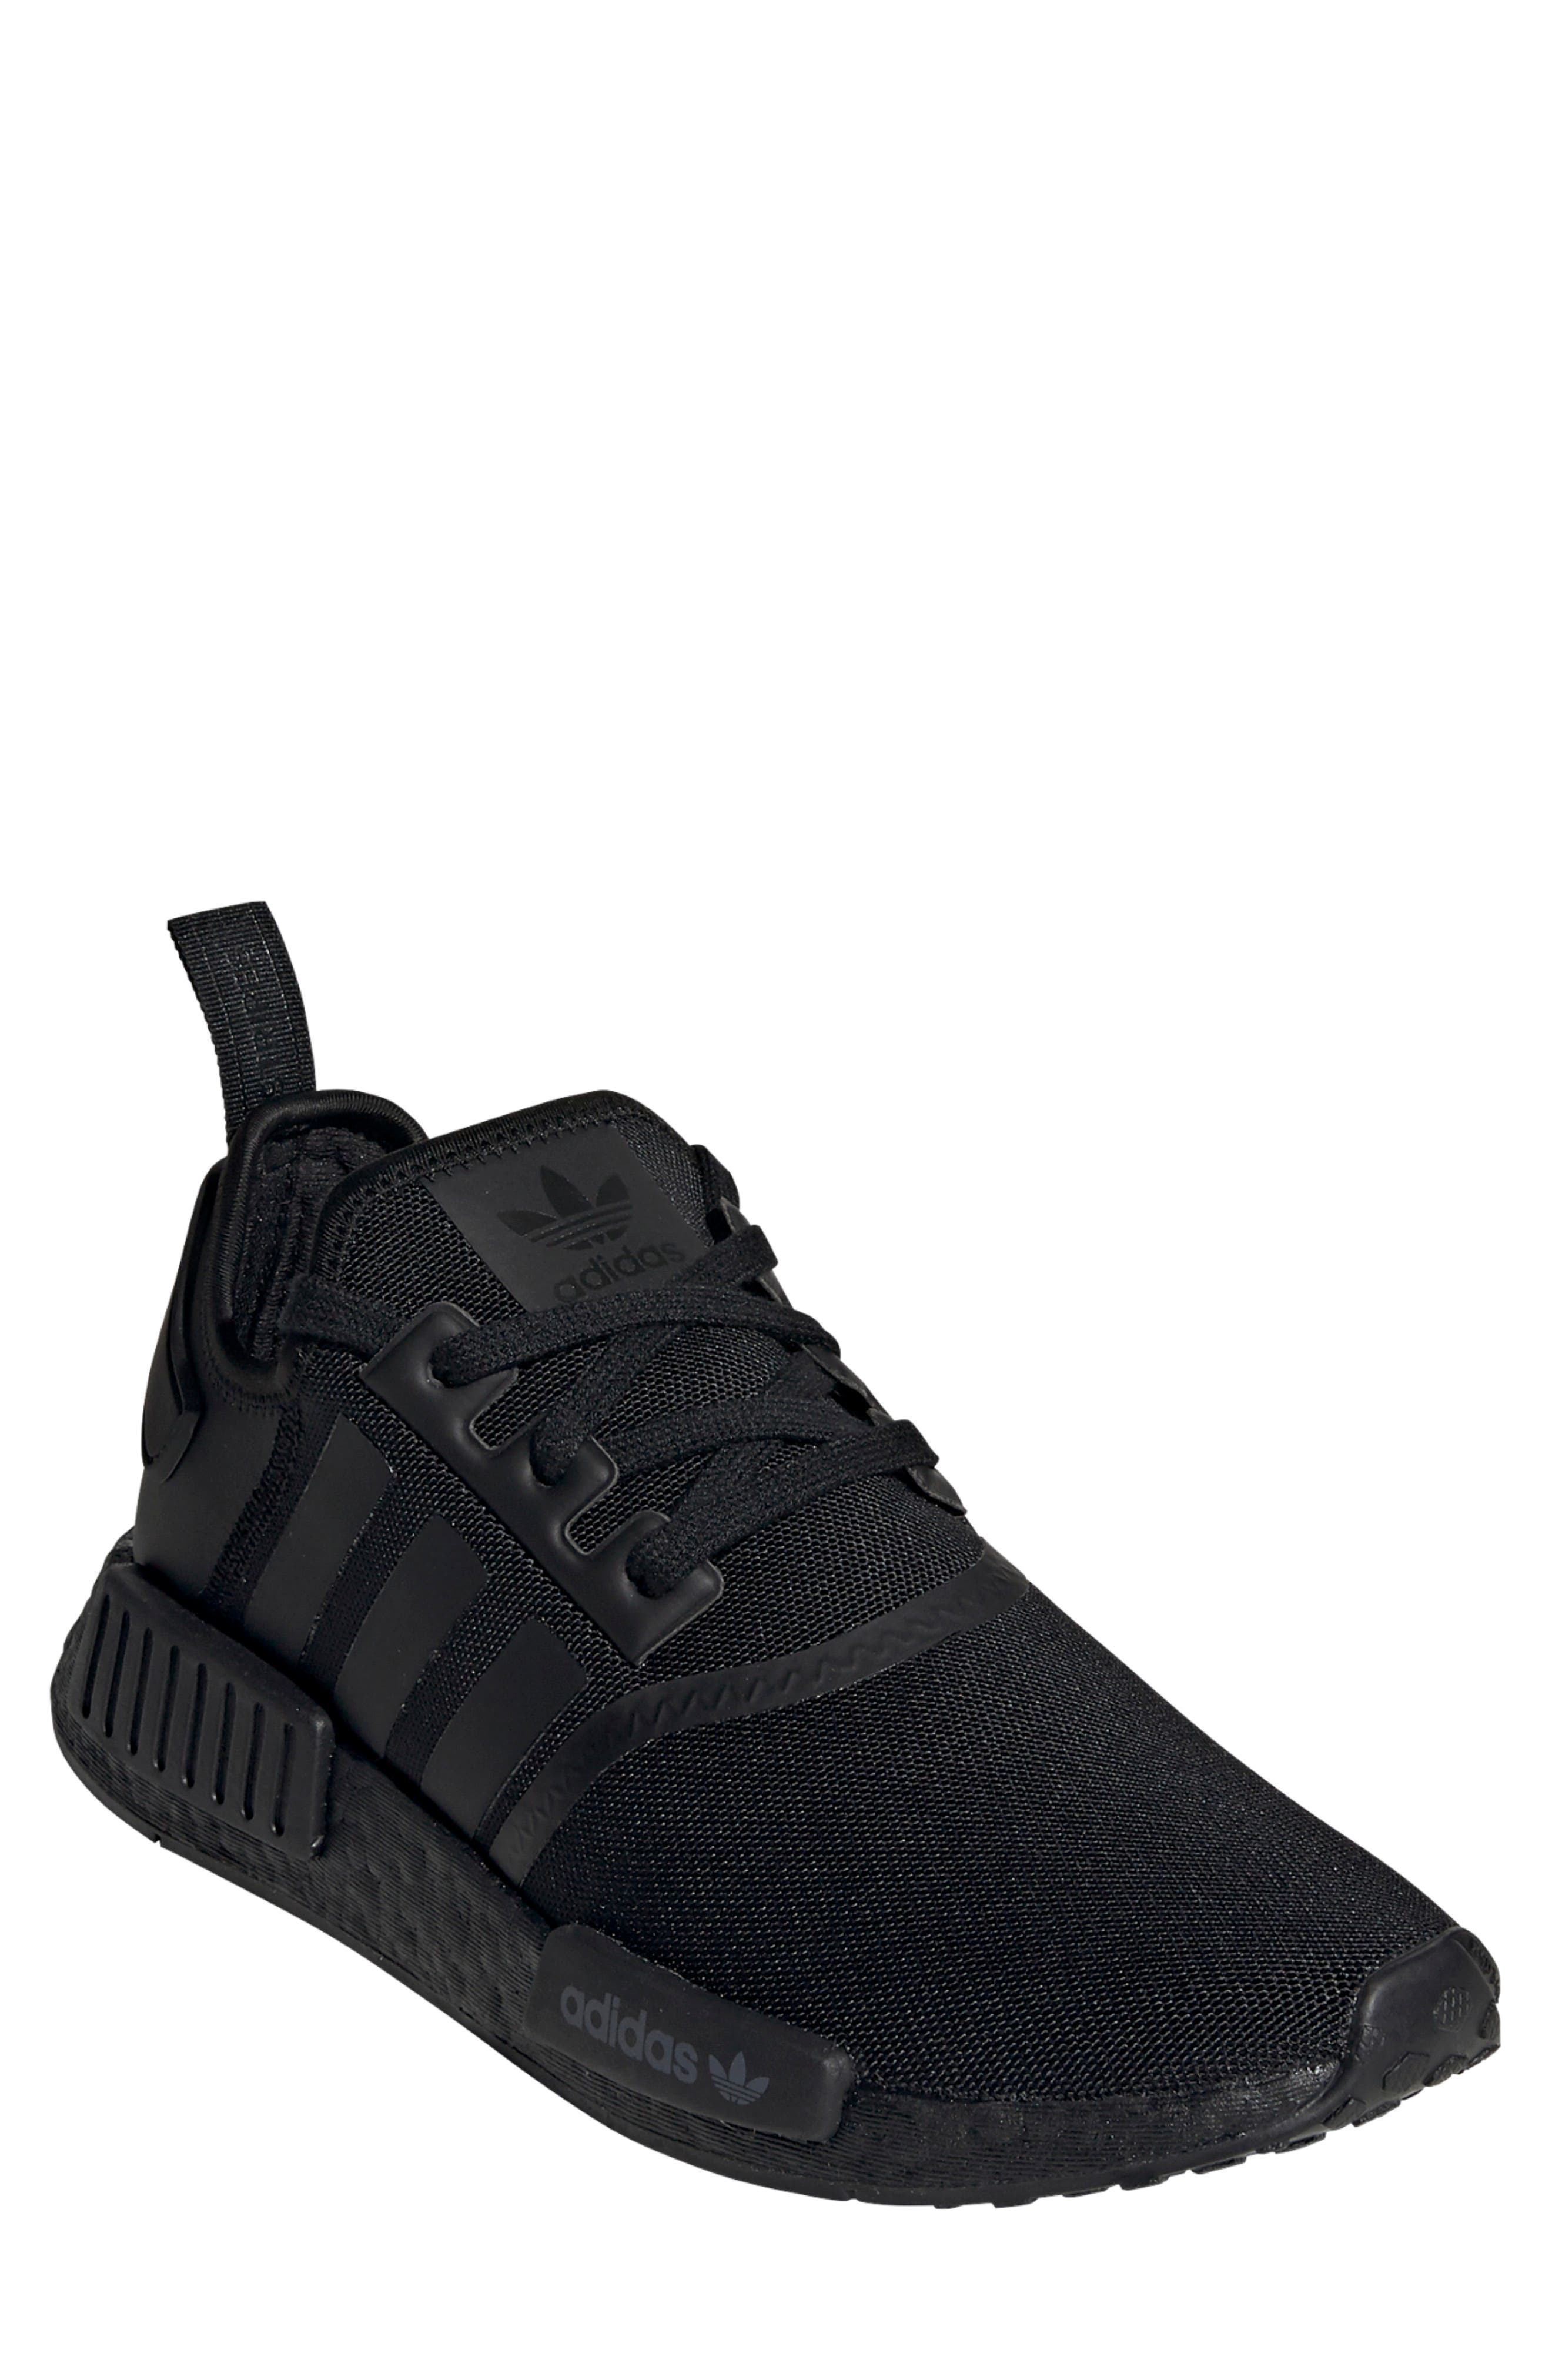 solid black adidas shoes